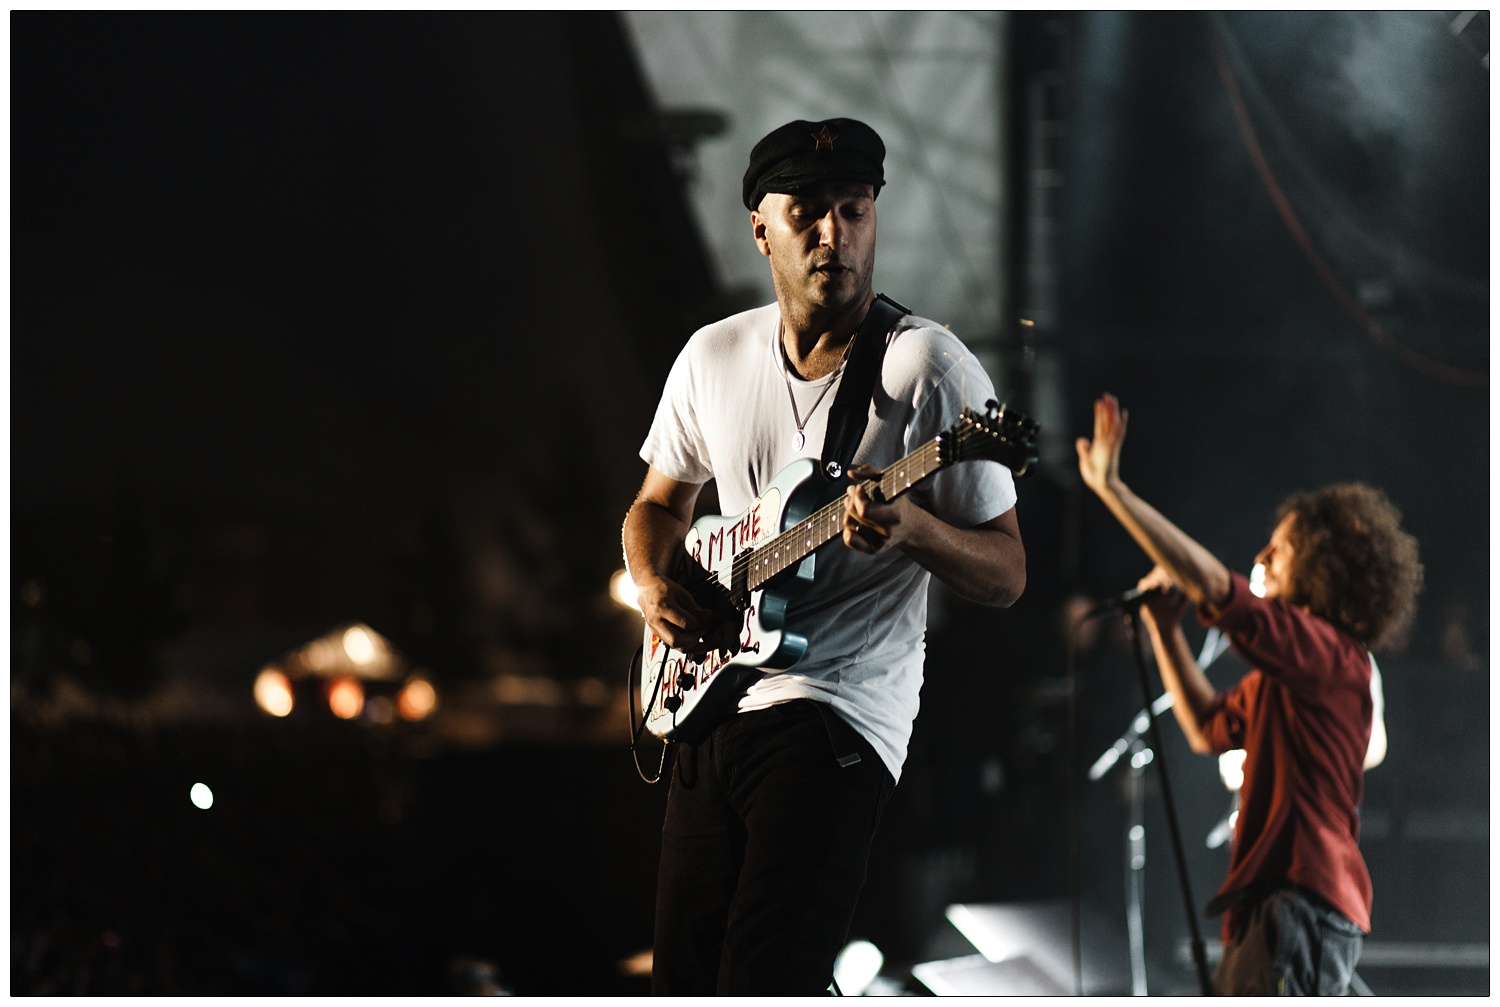 Photograph of Tom Morello playing Arm the Homeless guitar on stage, Zack de la Rocha is behind him. From the Killing in the Name Christmas number one gig in Finsbury Park.